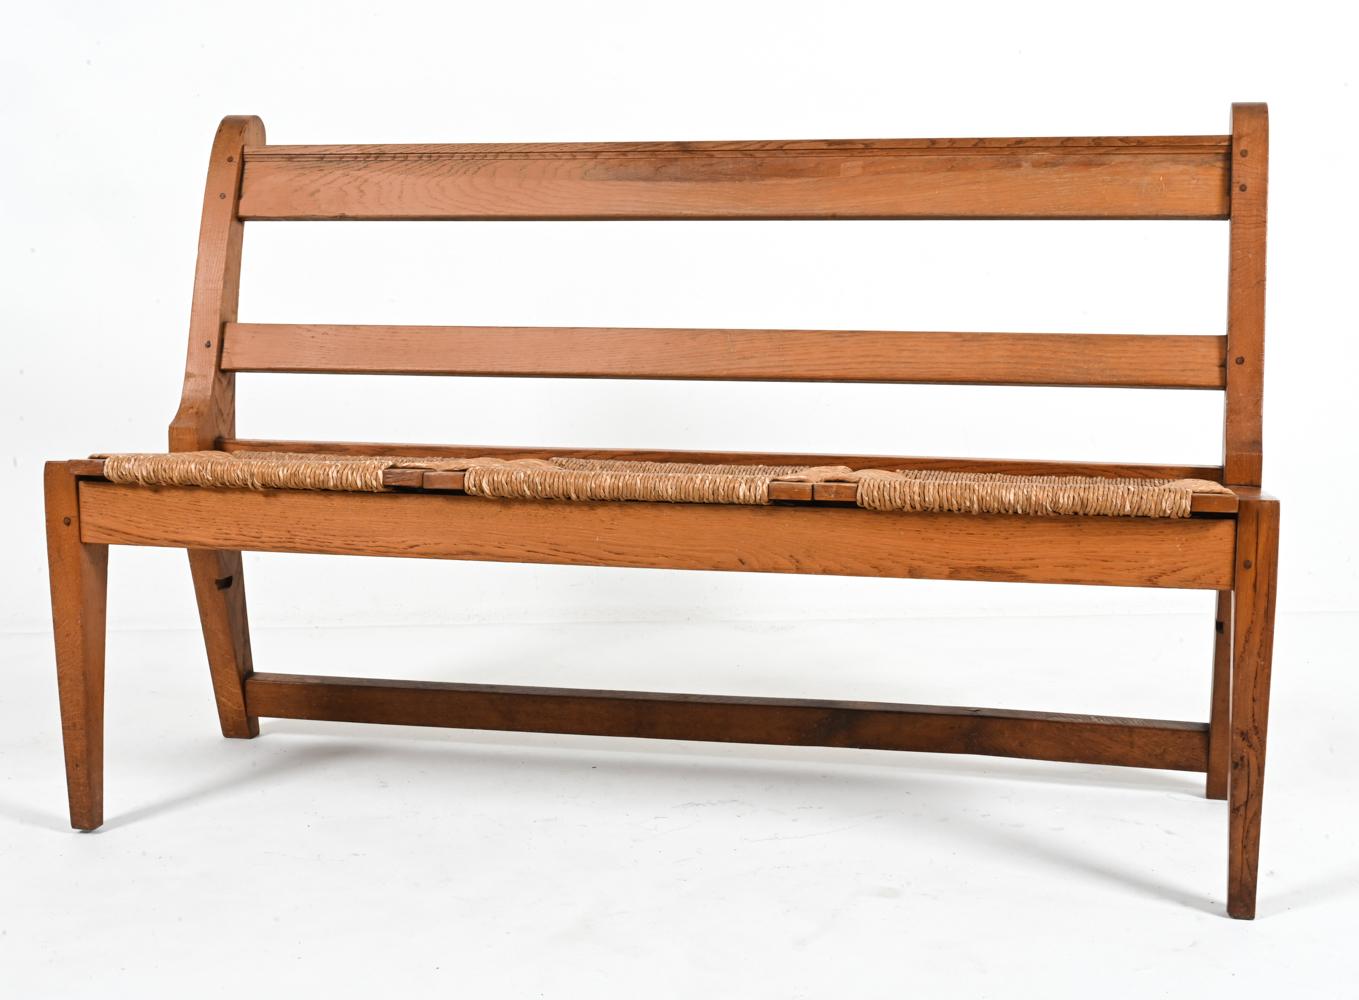 Steeped in history, this captivating oak and rush bench, crafted during the 1930's, embodies the enduring design of a classic church pew. 

The solid oak frame, boasting rich warmth and superior durability, promises stability for years to come. The